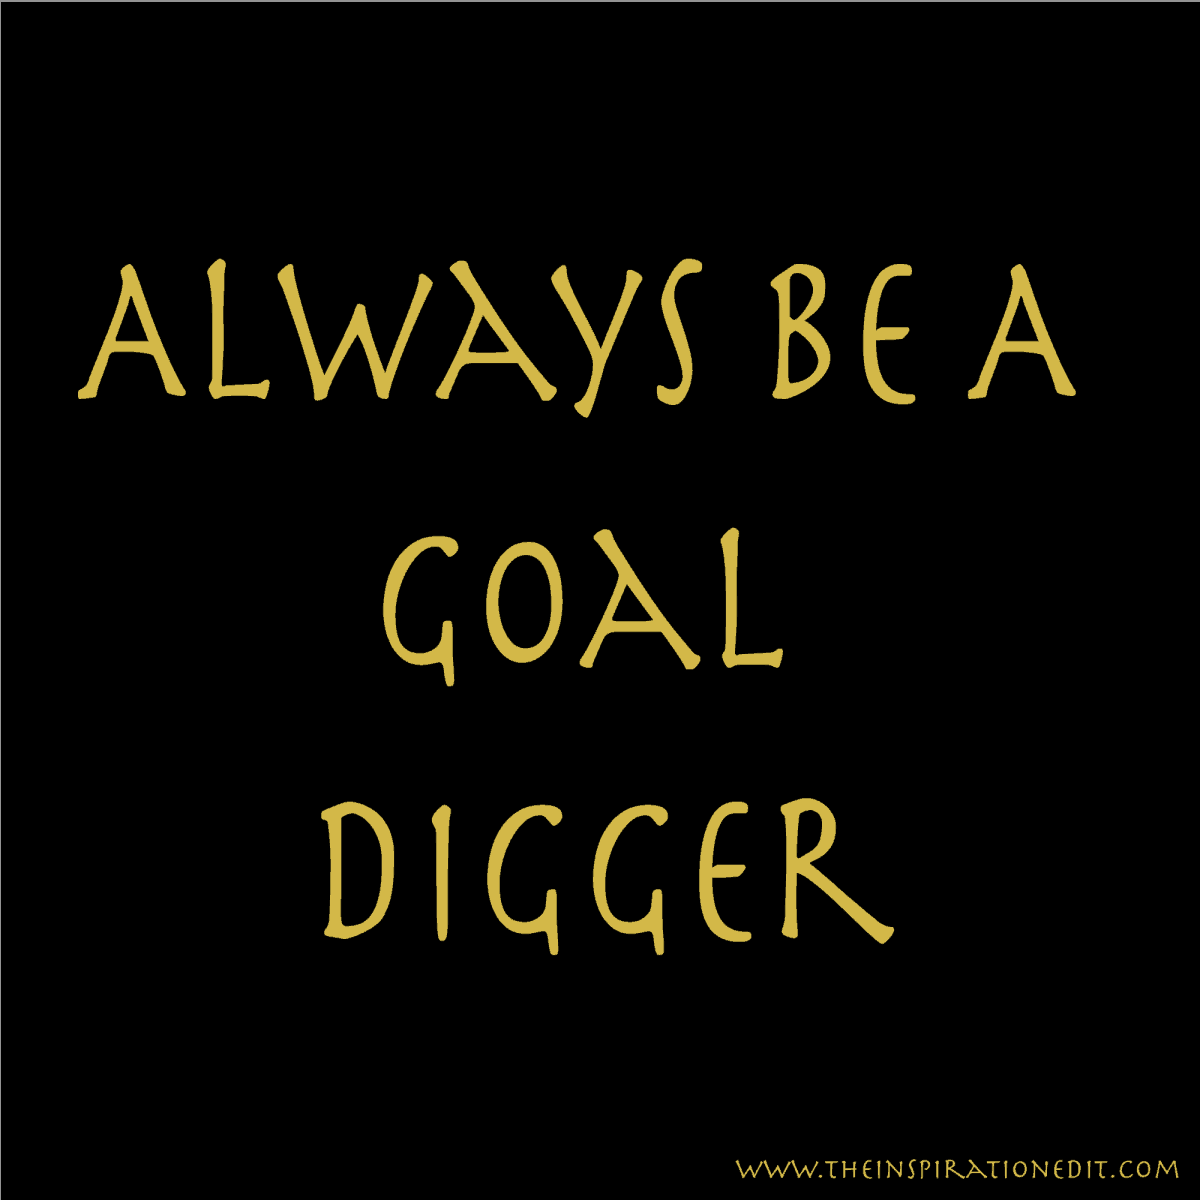 Always Be A Goal Digger Don't Lose Your Shine · The Inspiration Edit